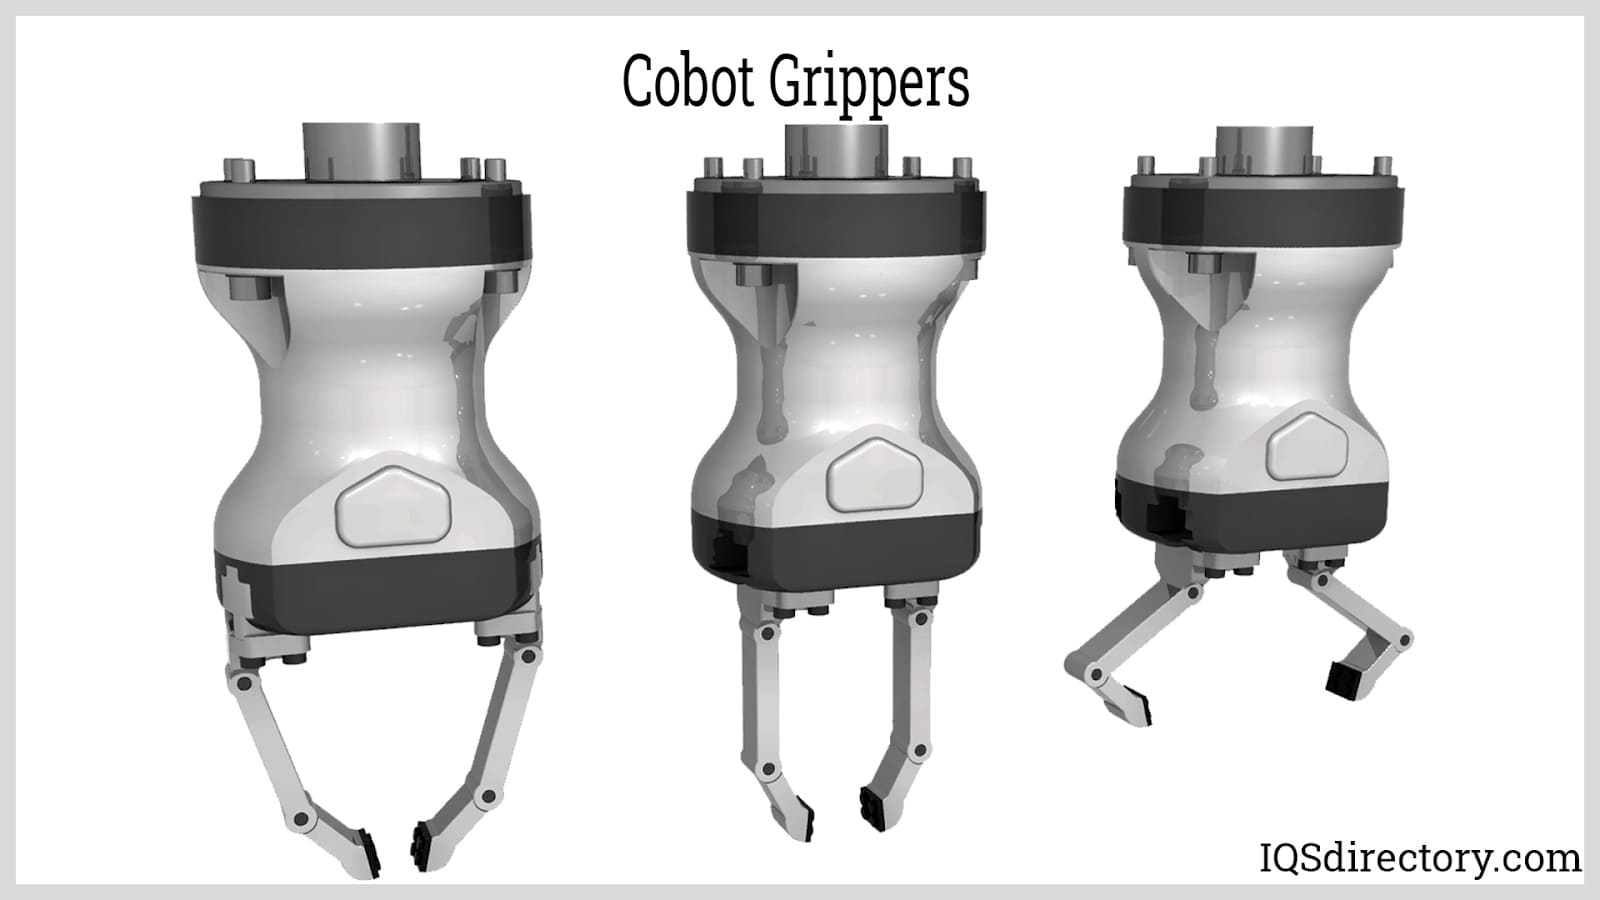 Cobot Grippers